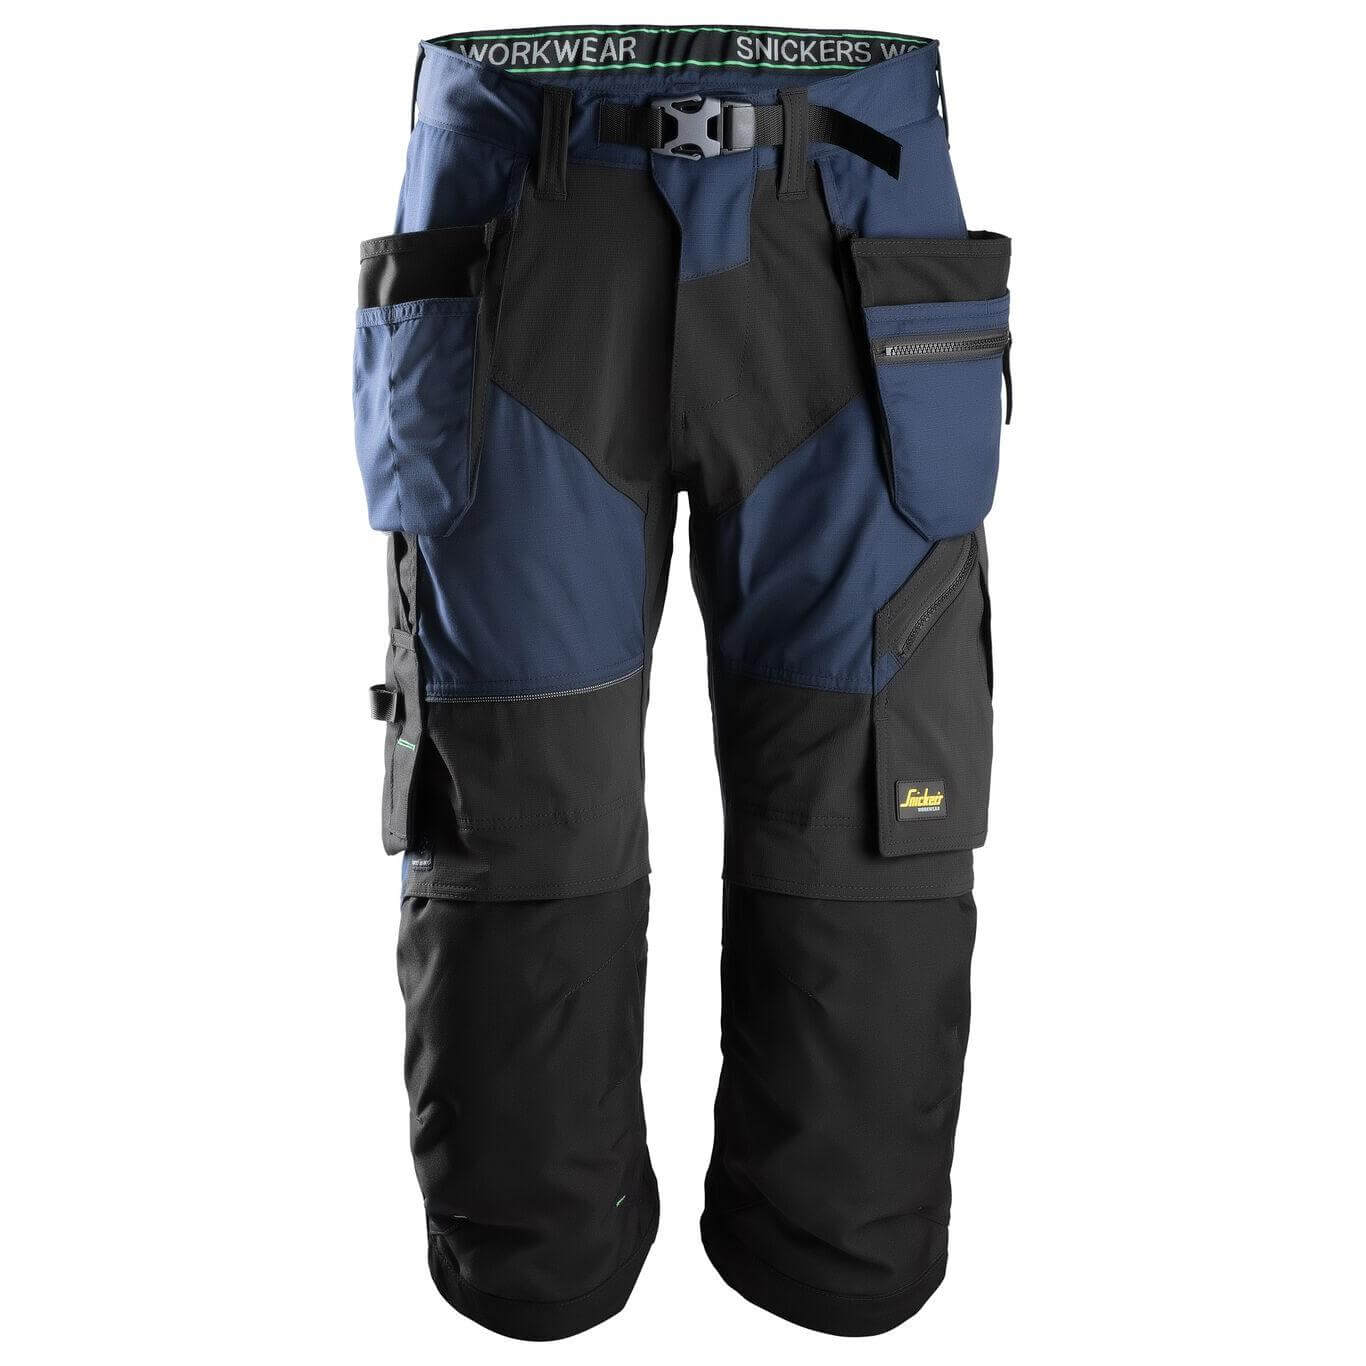 Snickers 6905 FlexiWork Lightweight Work Pirate Trousers with Holster Pockets Navy Black 3108831 #colour_navy-black